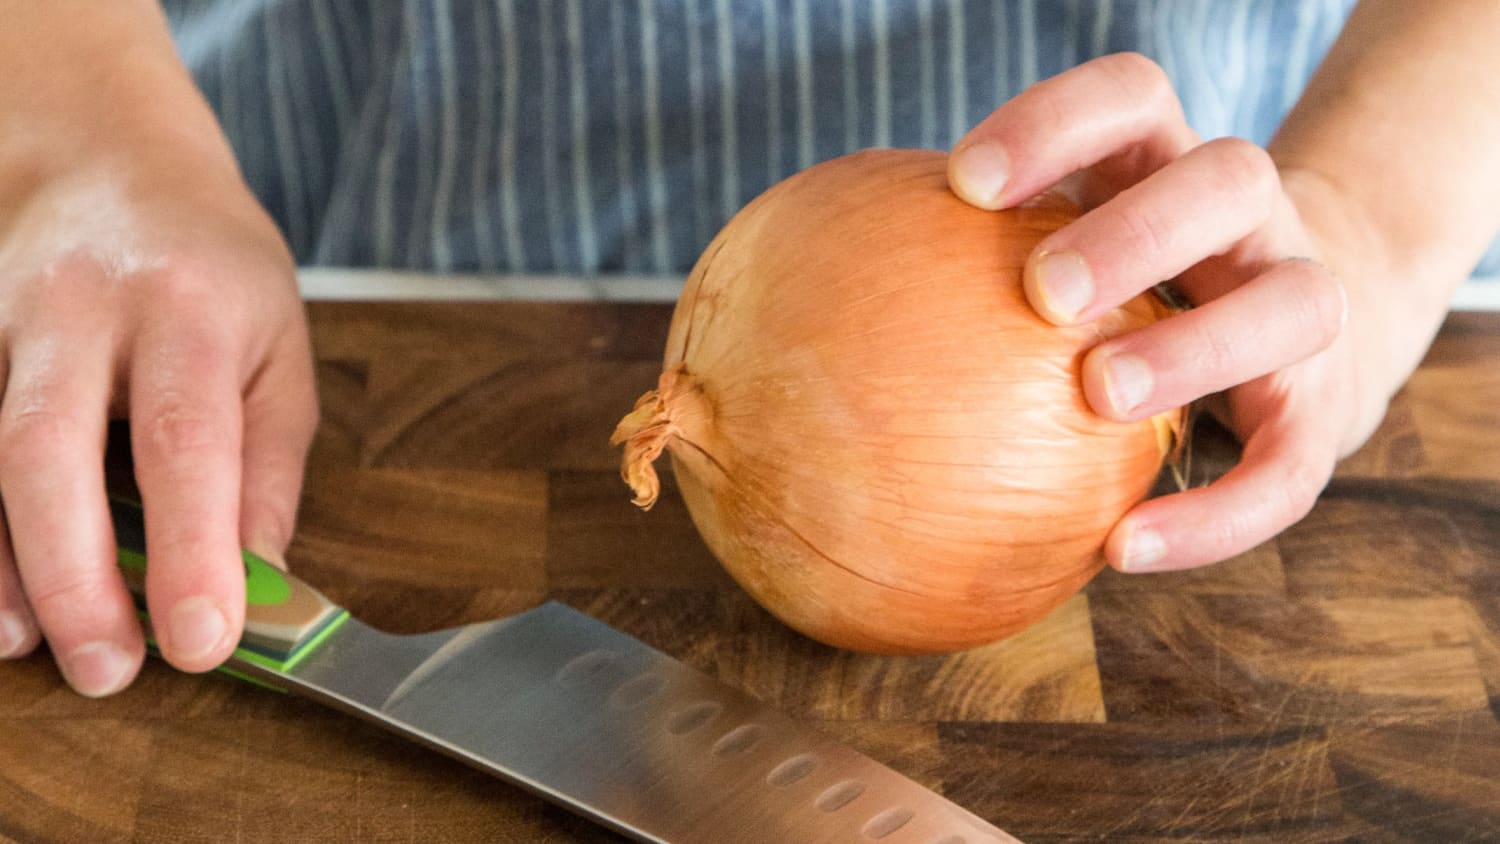 How To Cut An Onion - The Best Way to Cut An Onion